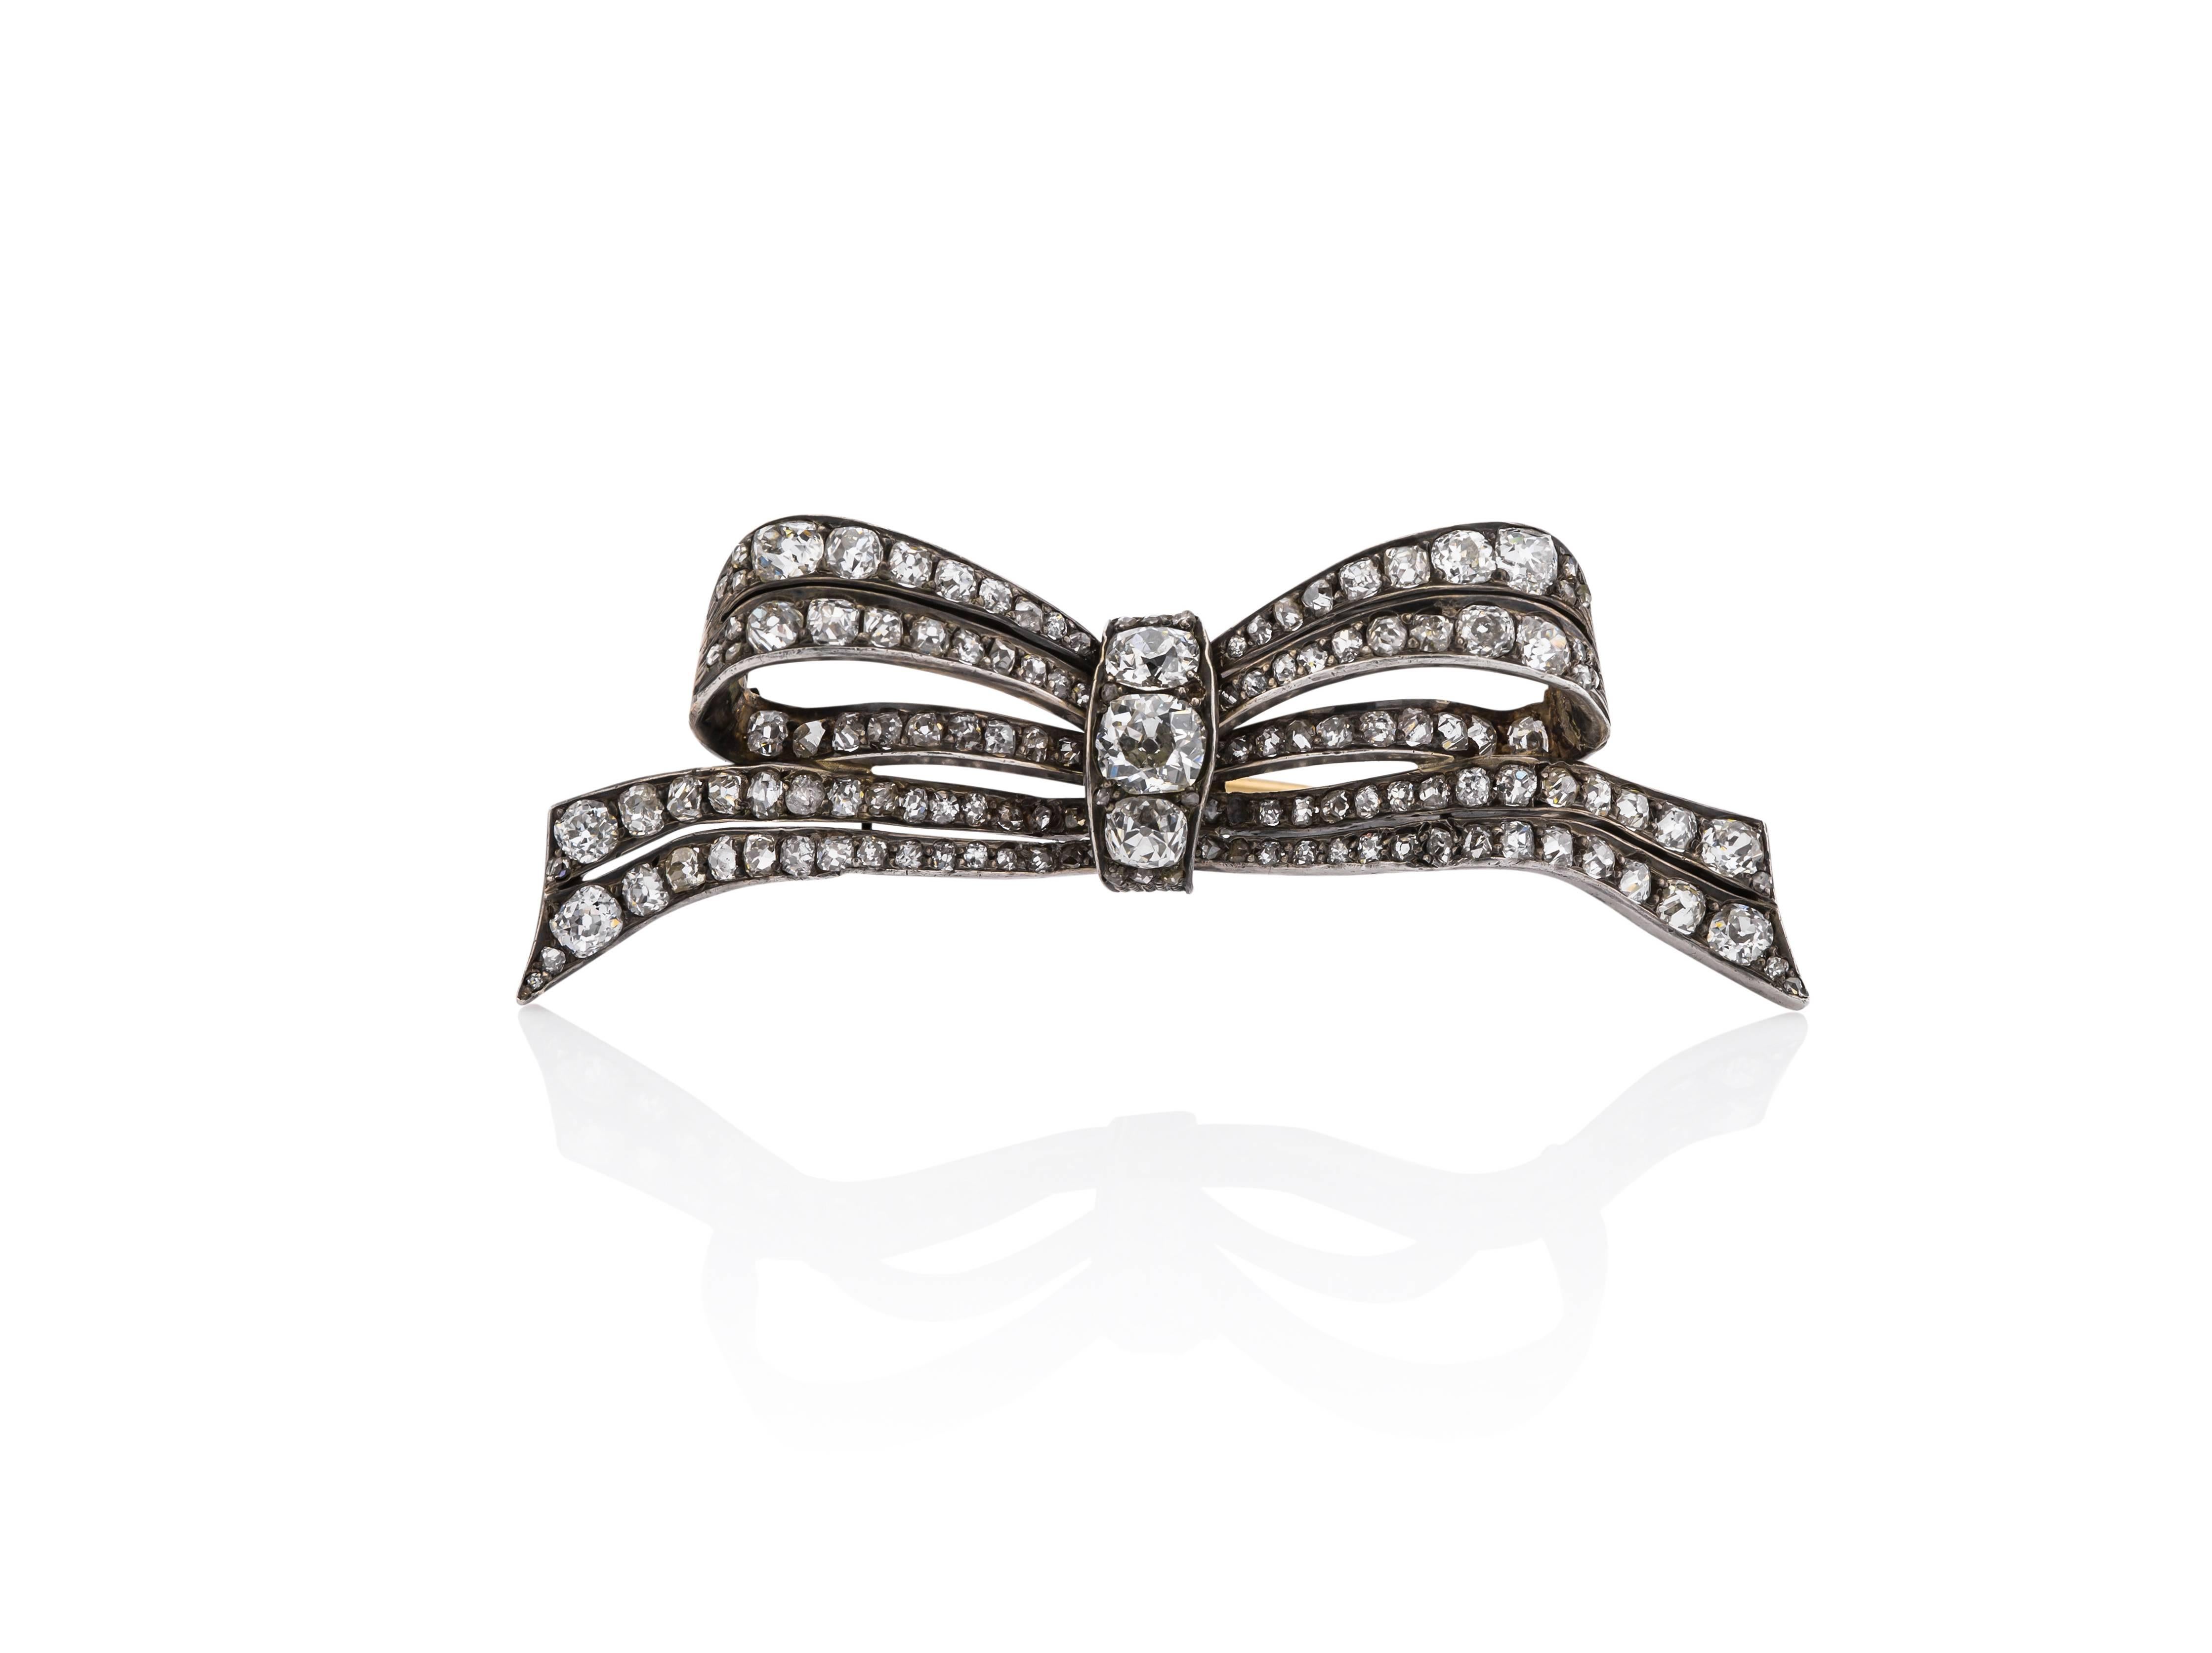 Elegant Silver and Rose Gold Bow Pin.  
Appears to be from a tiara. 
6.75ctw Diamonds
130 Diamonds
Old mine cut diamonds; 
center diamond .90cts
side diamonds .45cts each 
diamonds are of SI/2 clarity and K/L color